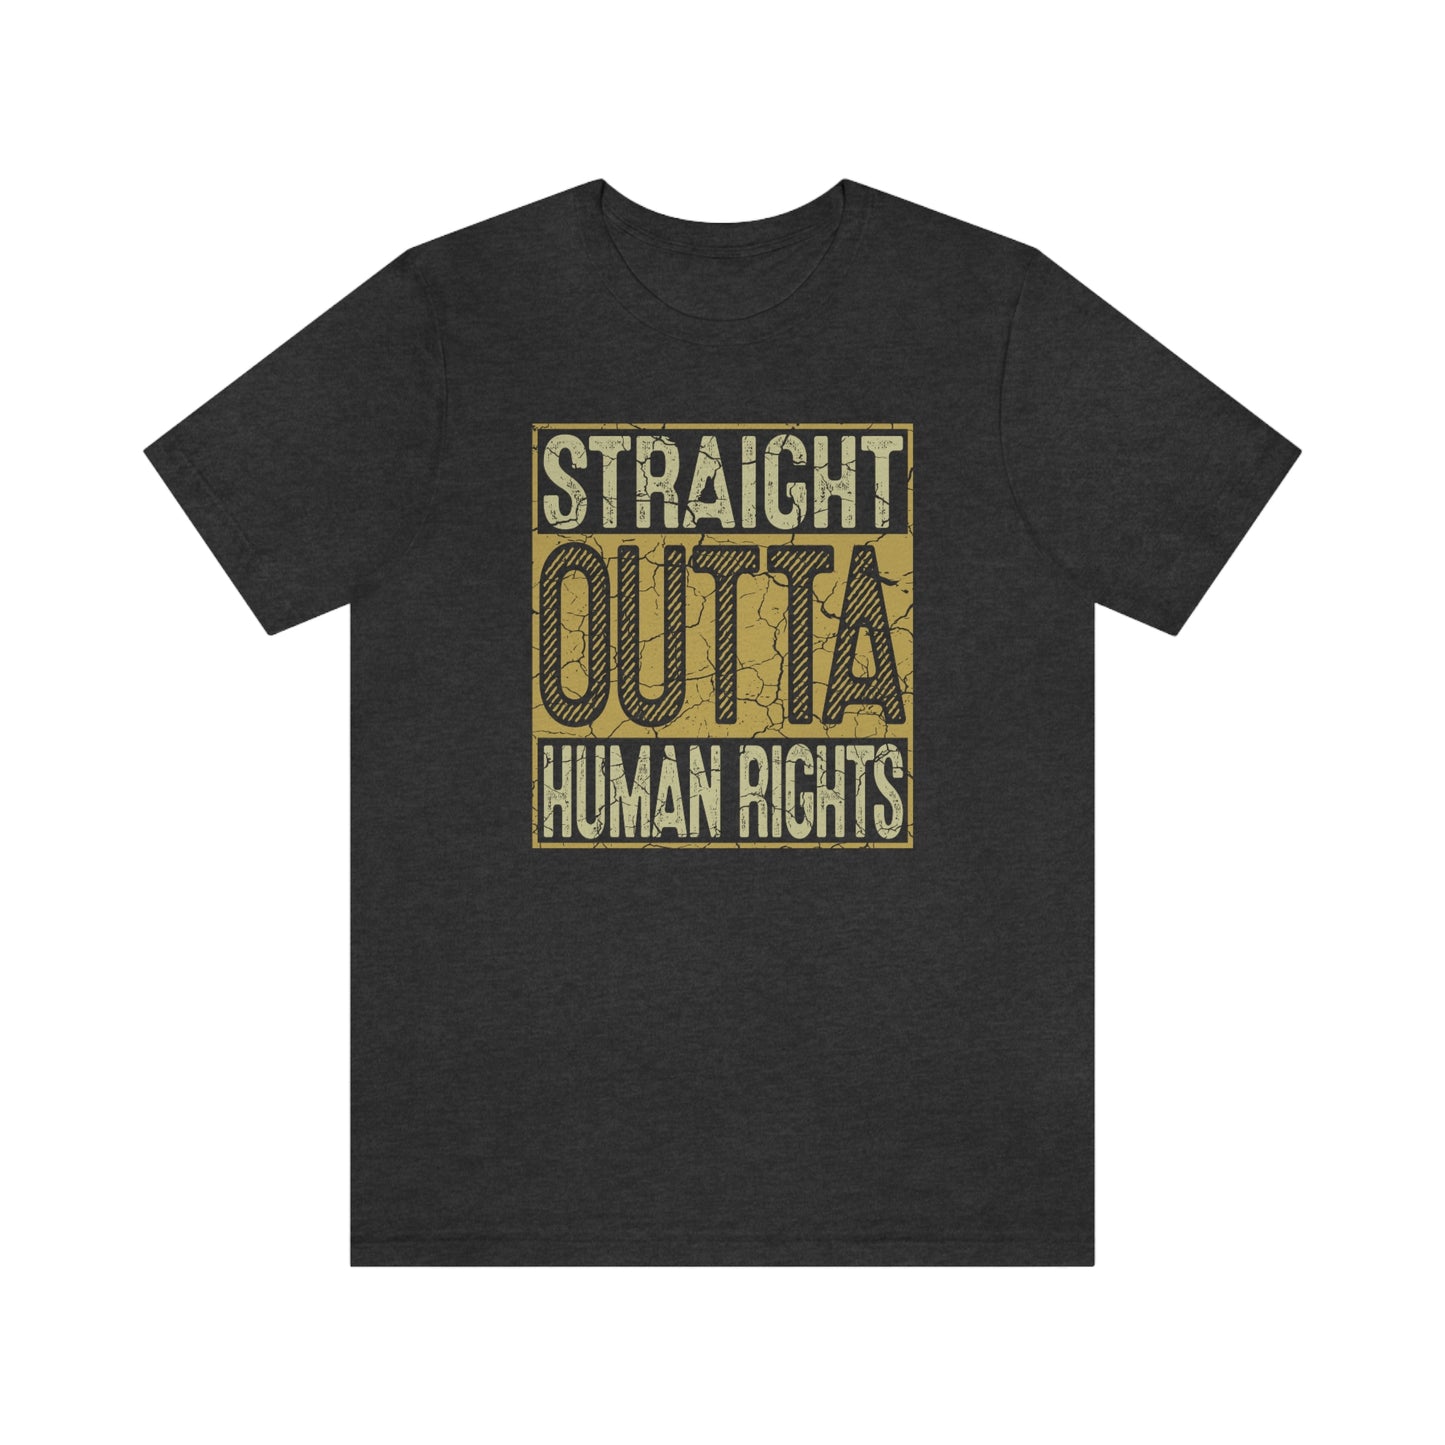 Straight Outta Human Rights t-shirt for women or men - 37 Design Unit